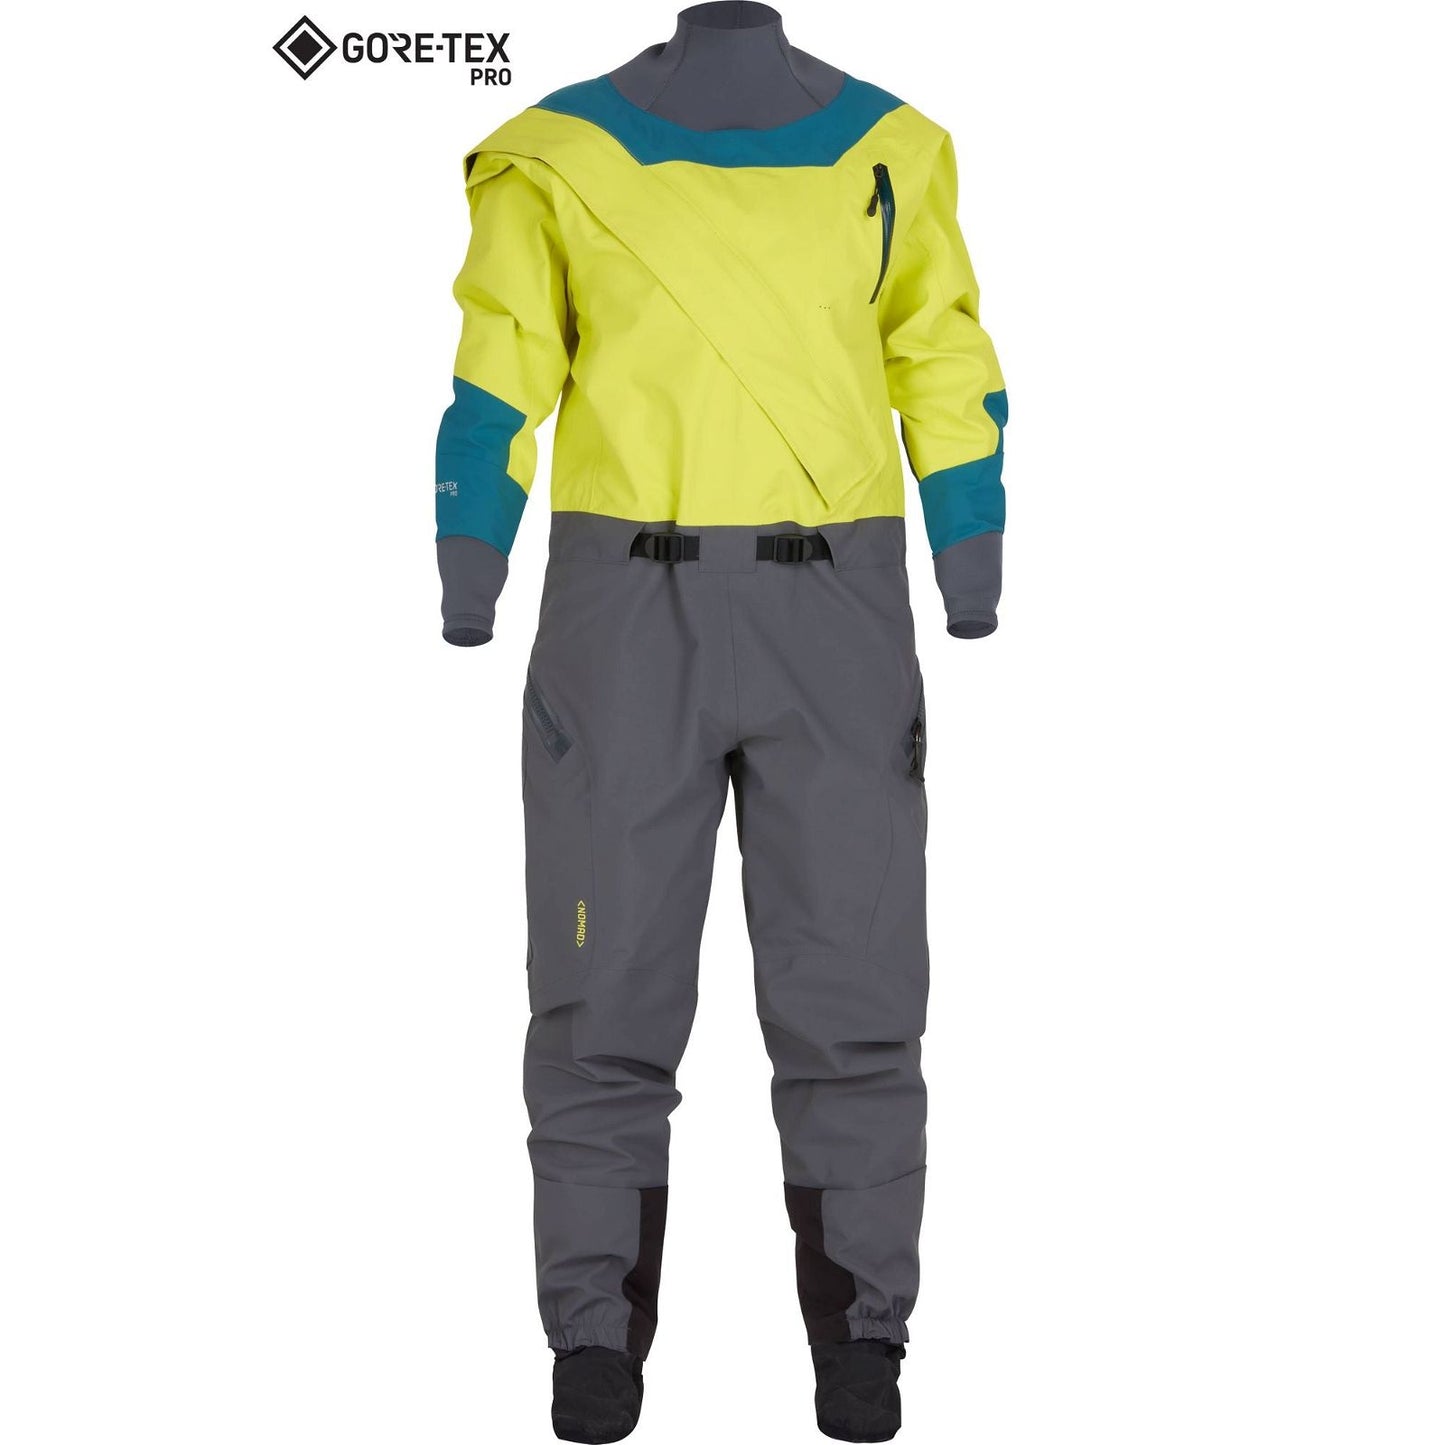 NRS  Women's Nomad GORE-TEX Pro Semi-Dry Suit  BestCoast Outfitters 